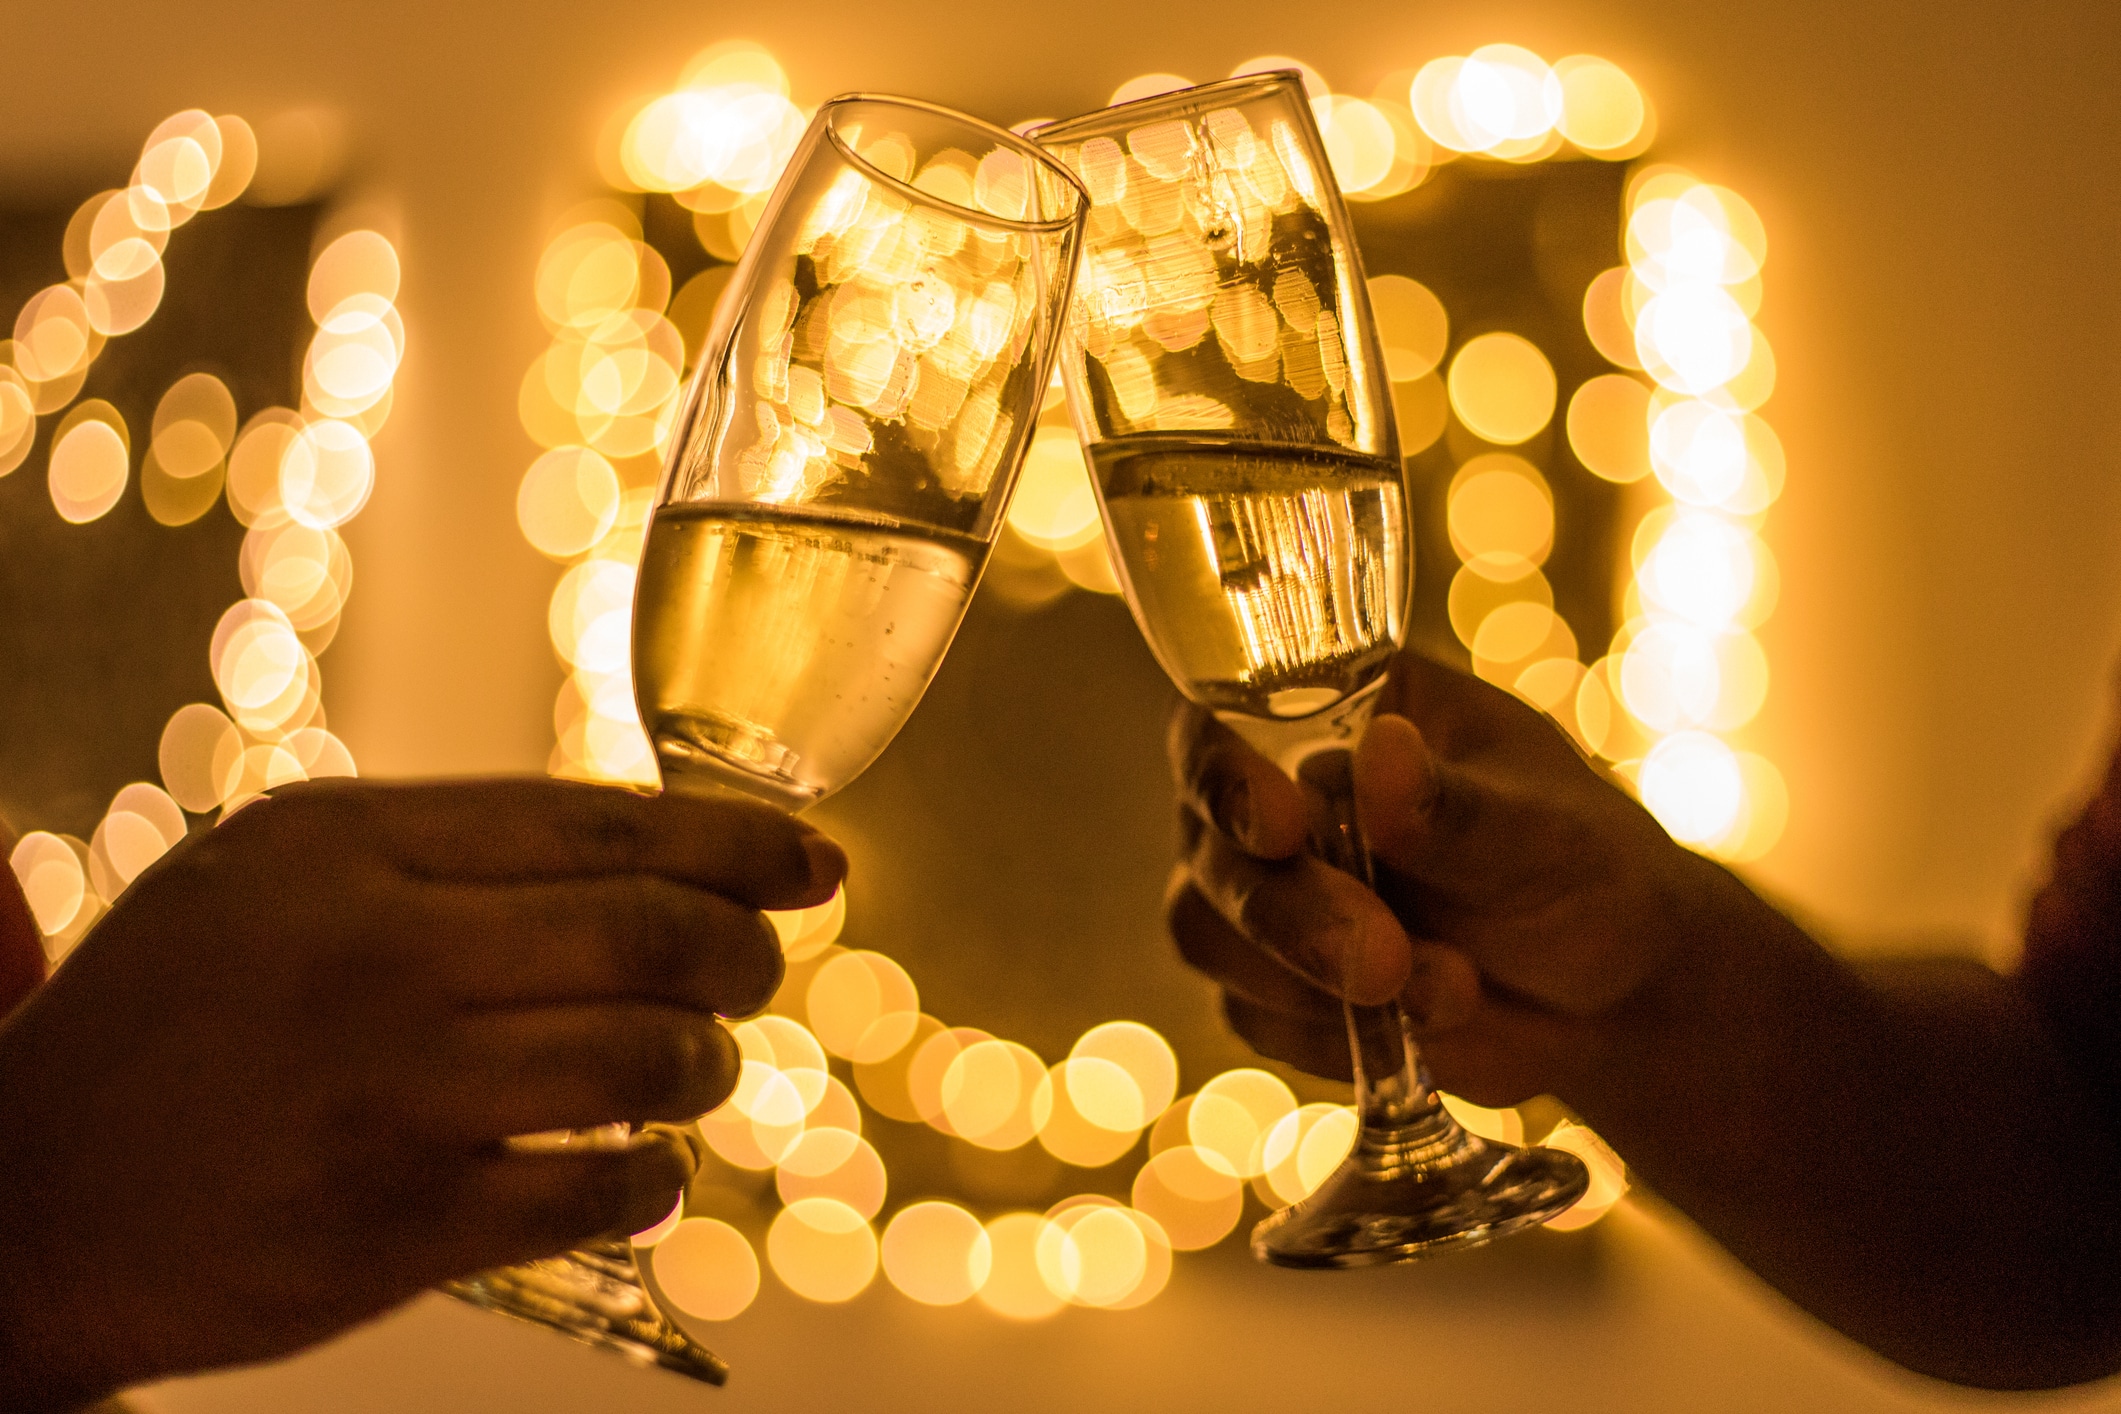 4 Alternative Holiday Parties That Bring In The Cheer